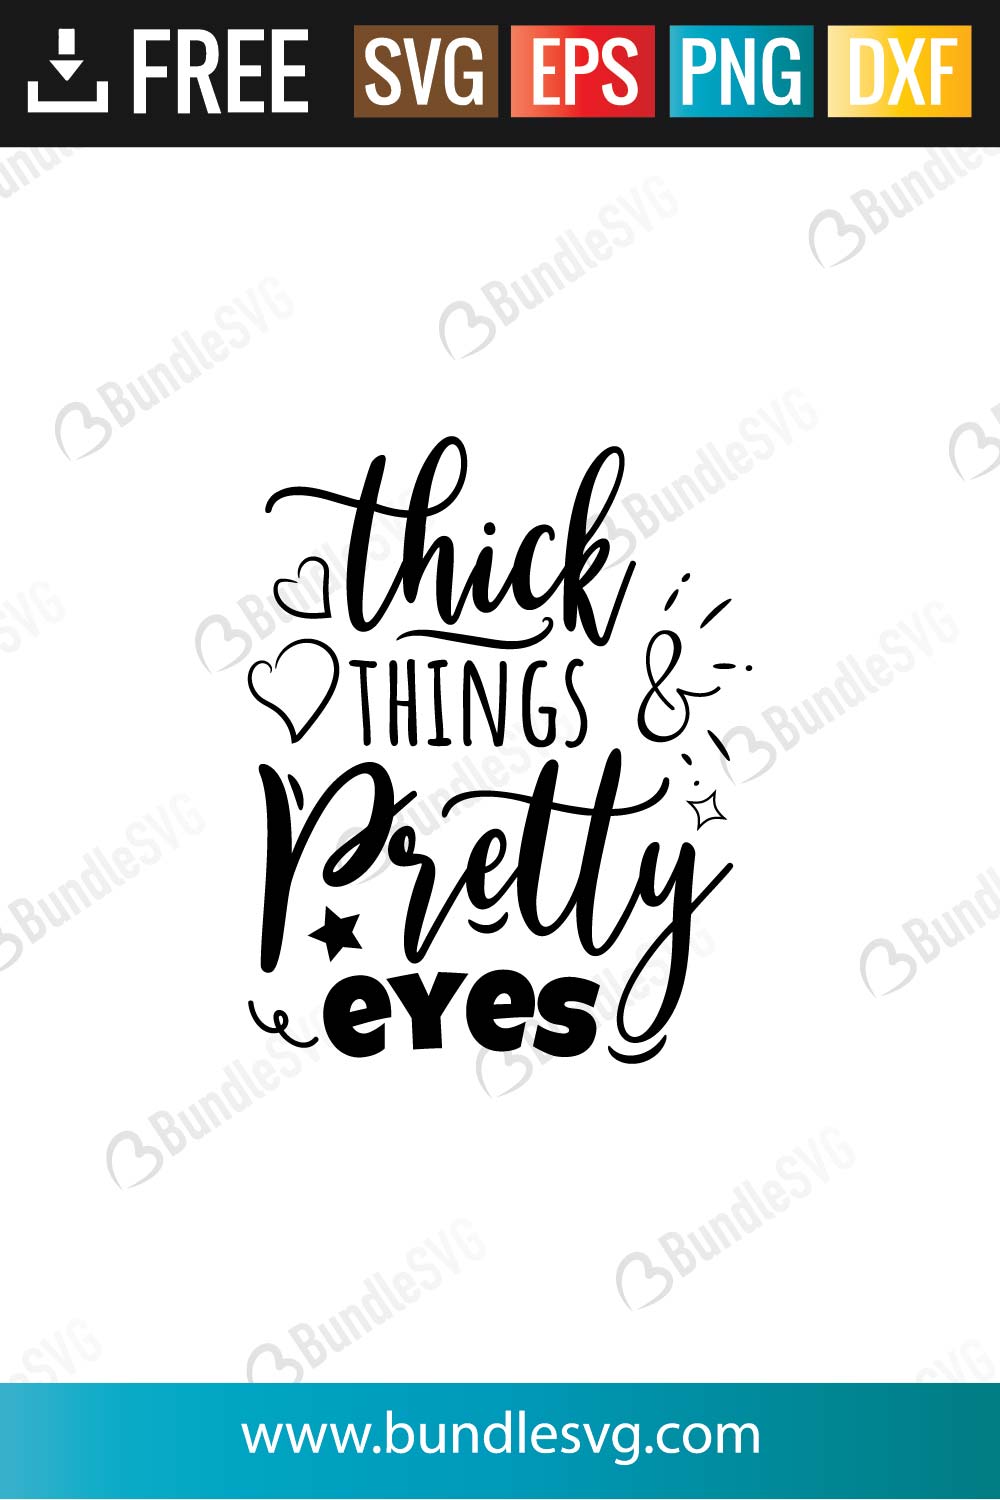 Download Thick Things And Pretty Eyes Svg Cut Files Bundlesvg